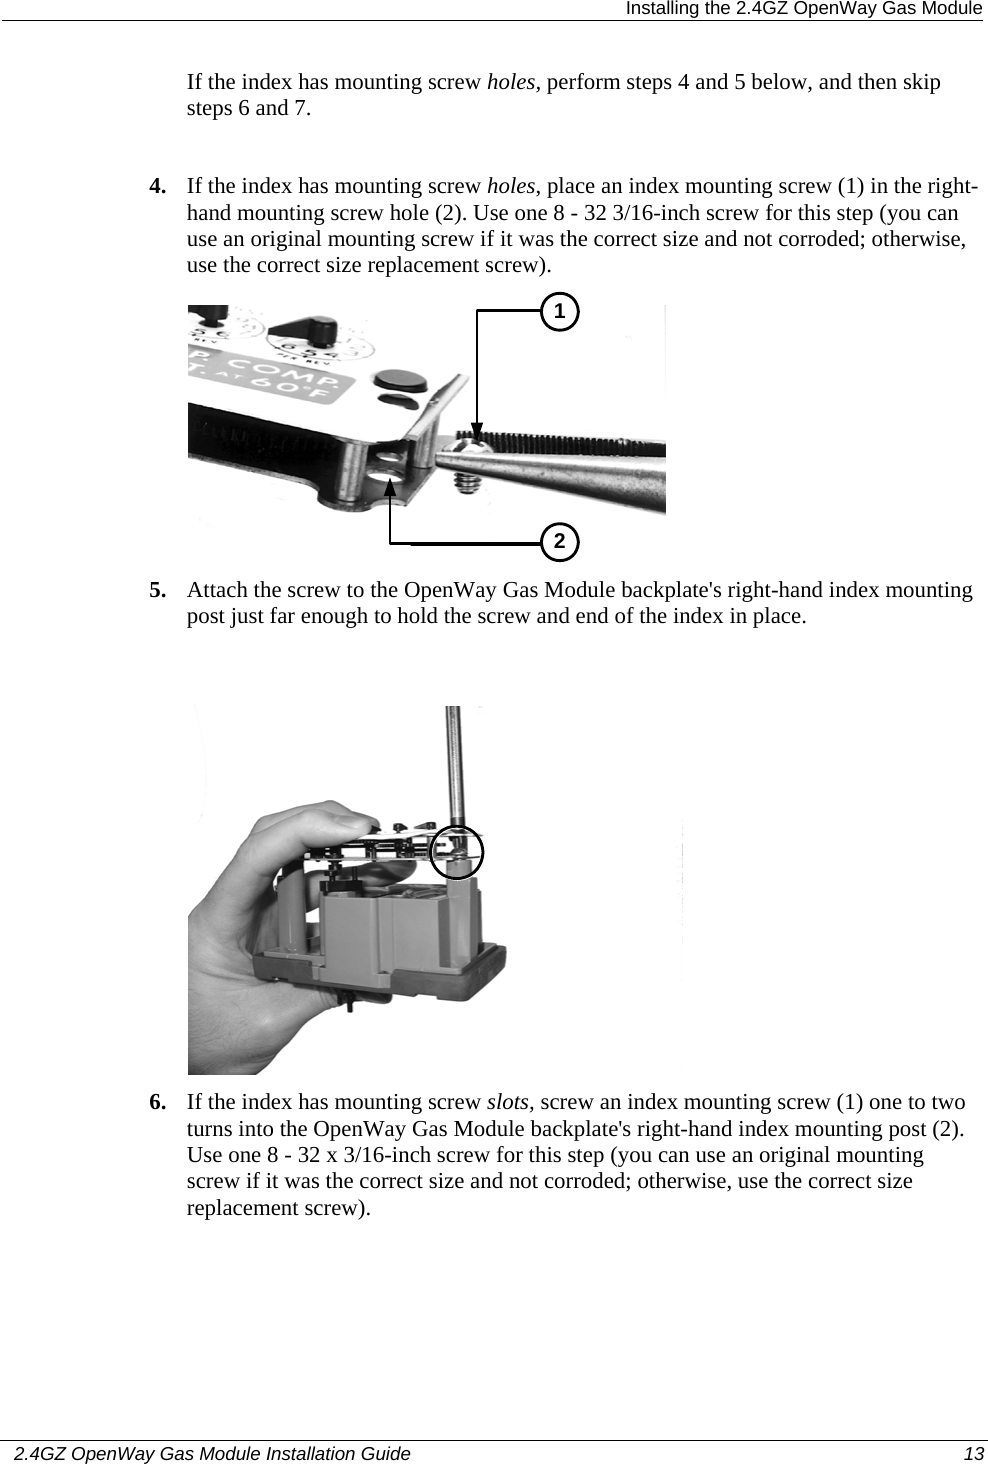  Installing the 2.4GZ OpenWay Gas Module   2.4GZ OpenWay Gas Module Installation Guide  13  If the index has mounting screw holes, perform steps 4 and 5 below, and then skip steps 6 and 7.   4. If the index has mounting screw holes, place an index mounting screw (1) in the right-hand mounting screw hole (2). Use one 8 - 32 3/16-inch screw for this step (you can use an original mounting screw if it was the correct size and not corroded; otherwise, use the correct size replacement screw).  12 5. Attach the screw to the OpenWay Gas Module backplate&apos;s right-hand index mounting post just far enough to hold the screw and end of the index in place.   6. If the index has mounting screw slots, screw an index mounting screw (1) one to two turns into the OpenWay Gas Module backplate&apos;s right-hand index mounting post (2). Use one 8 - 32 x 3/16-inch screw for this step (you can use an original mounting screw if it was the correct size and not corroded; otherwise, use the correct size replacement screw).  